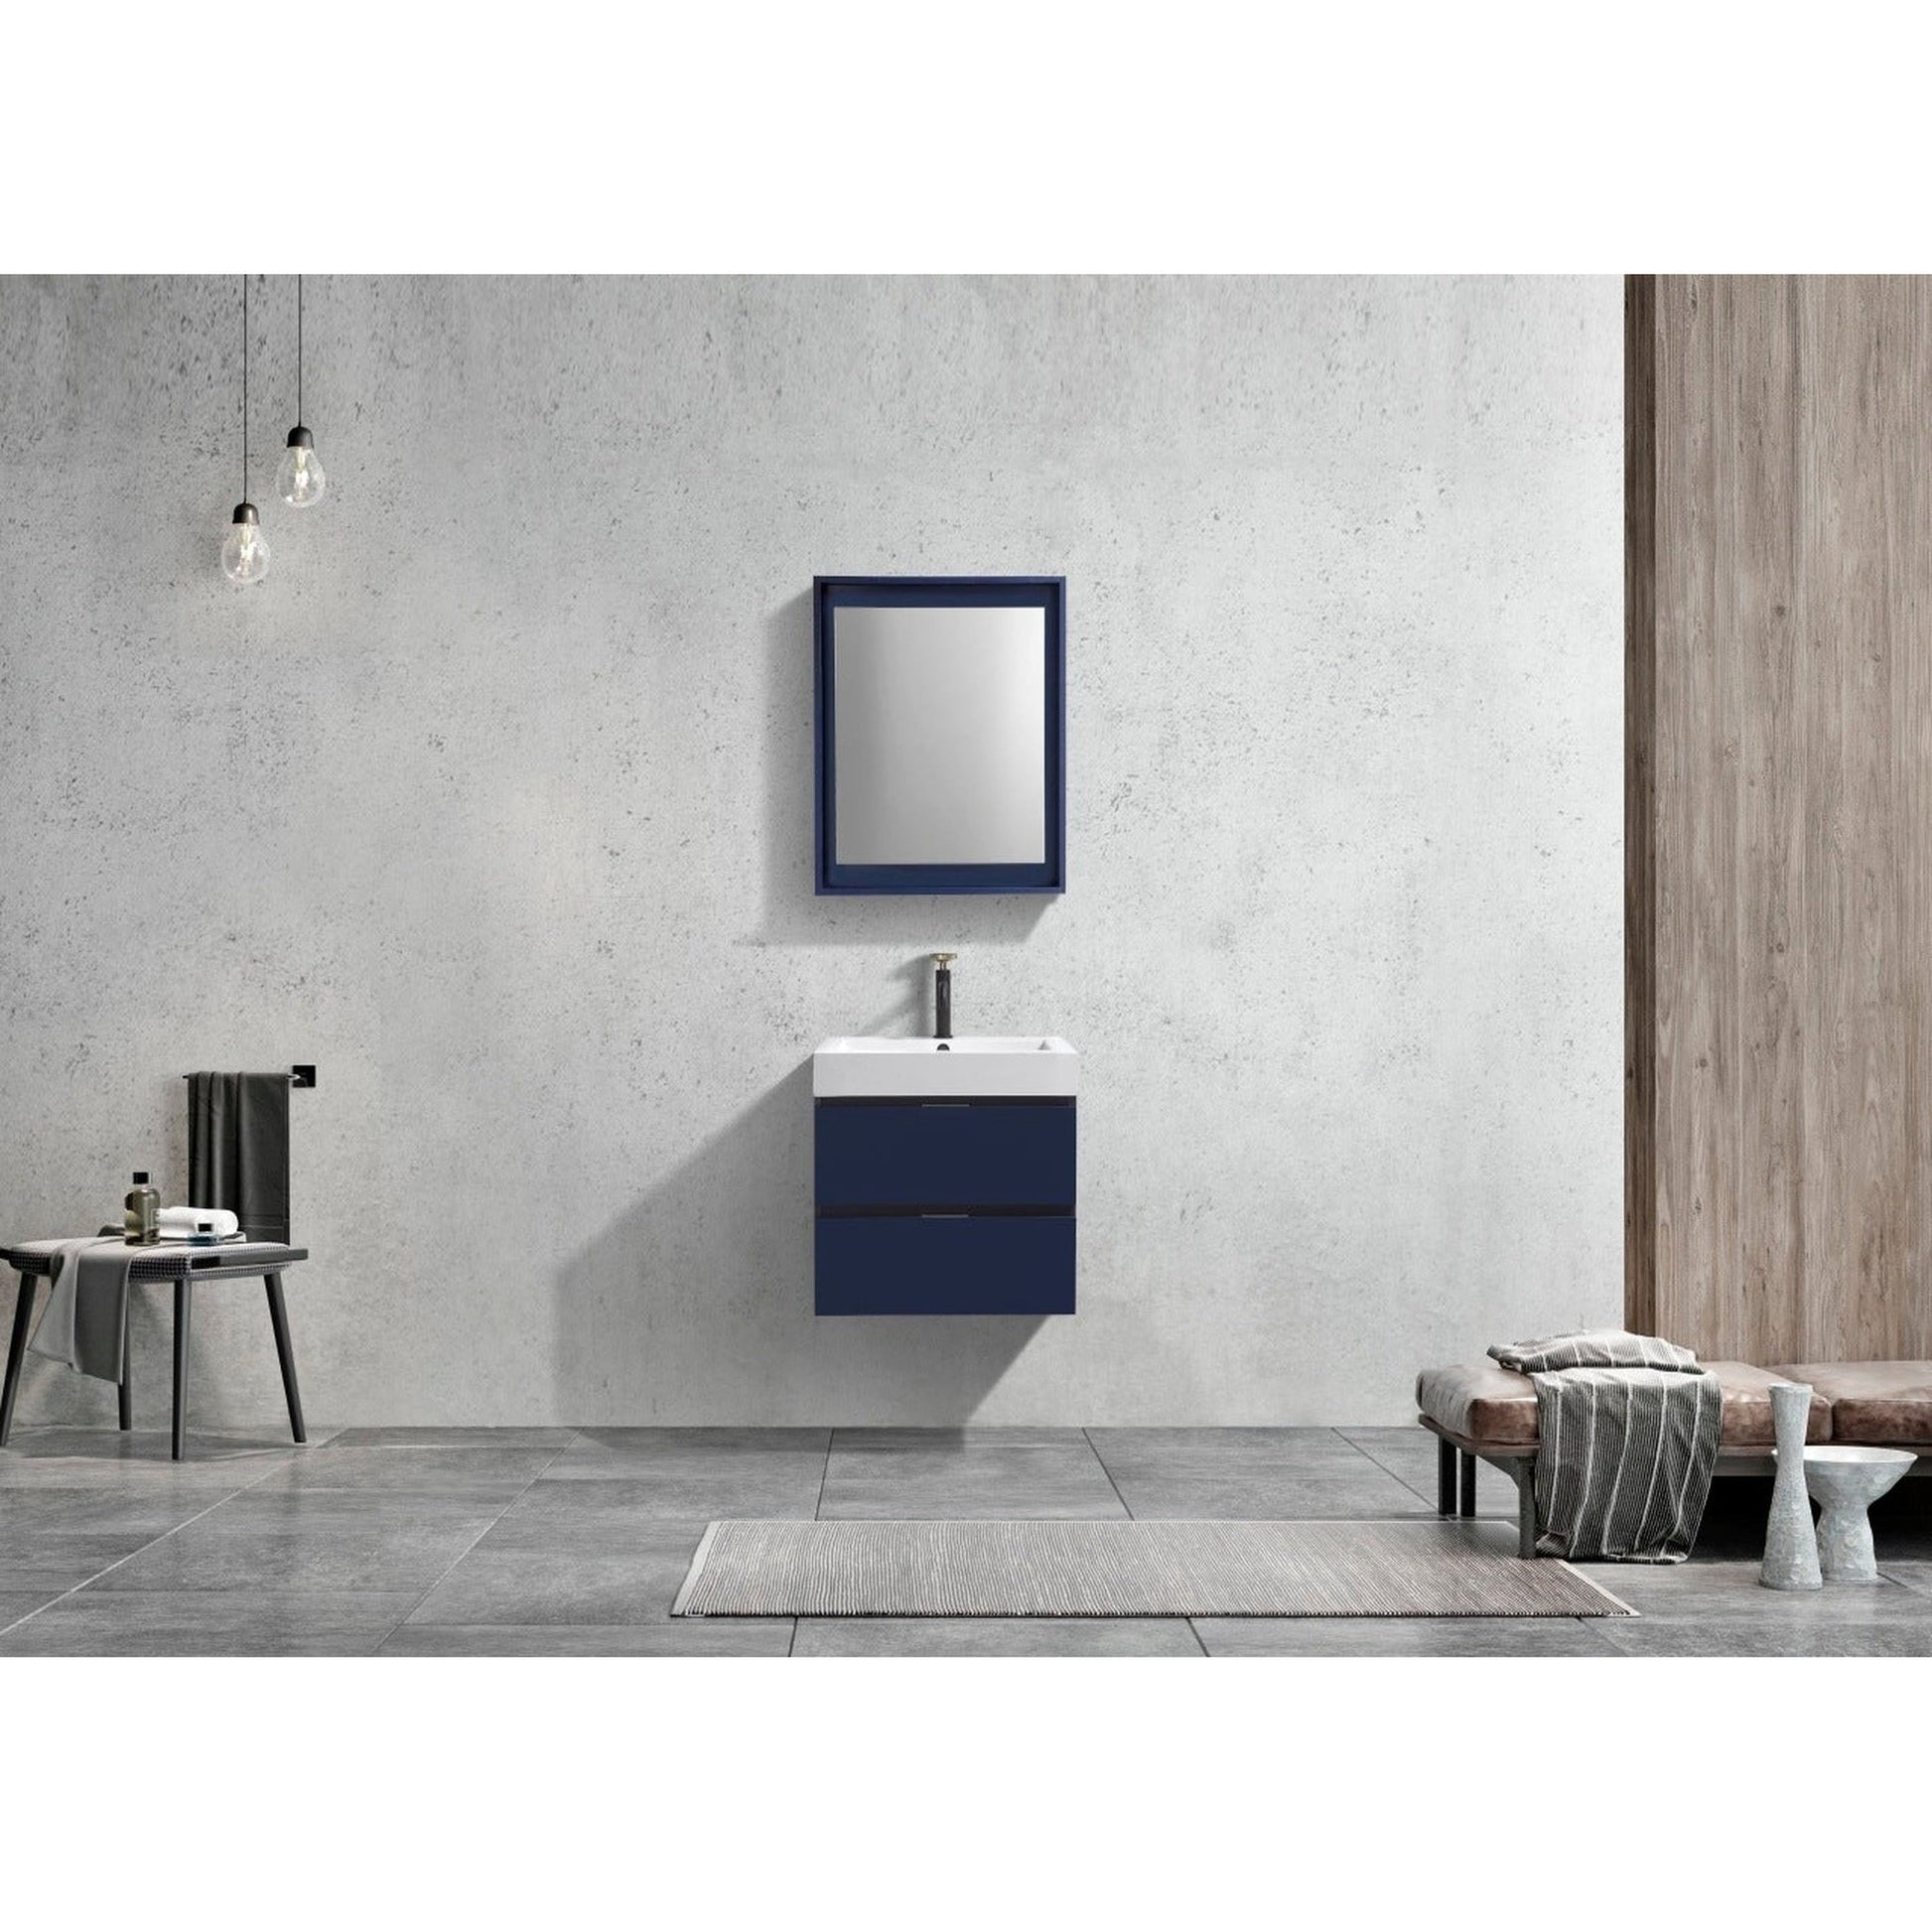 KubeBath Bliss 24" Blue Wall-Mounted Modern Bathroom Vanity With Single Integrated Acrylic Sink With Overflow and 24" White Framed Mirror With Shelf